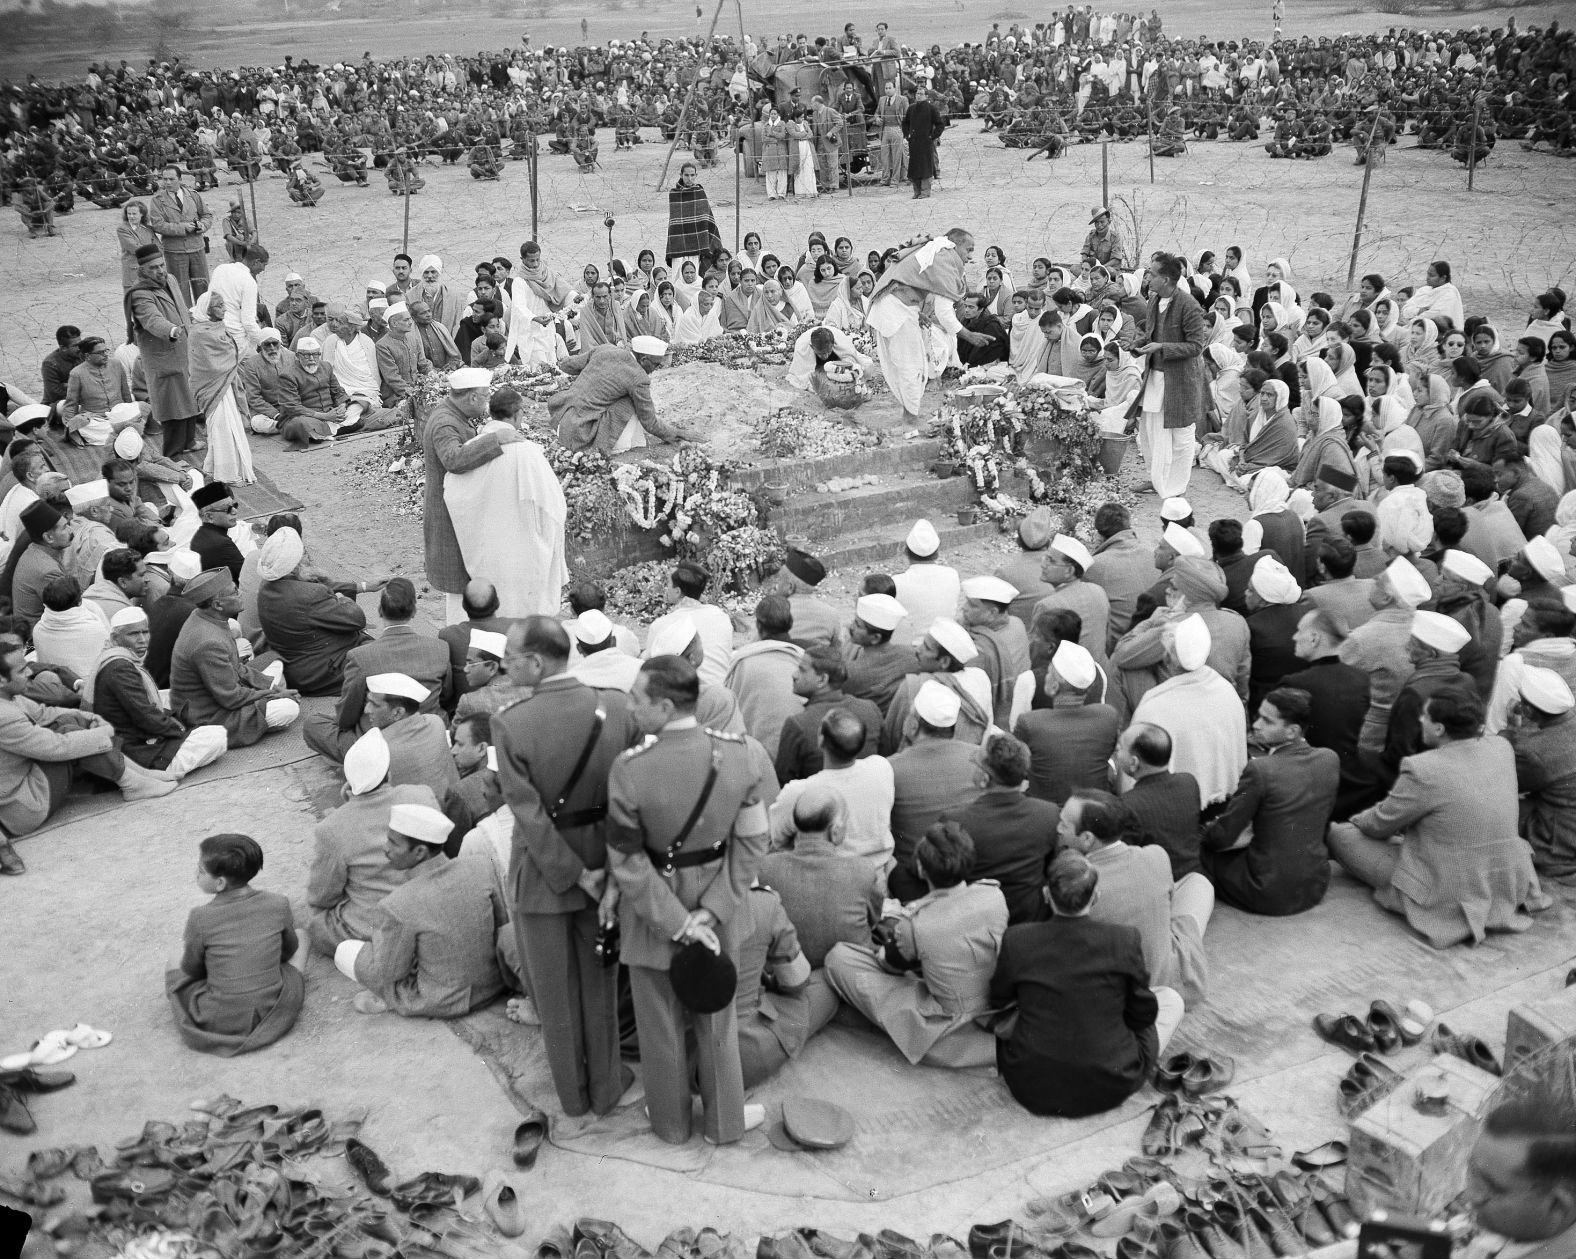 Gandhi's followers surround a flower-decked platform holding his ashes the day after he was cremated in 1948.